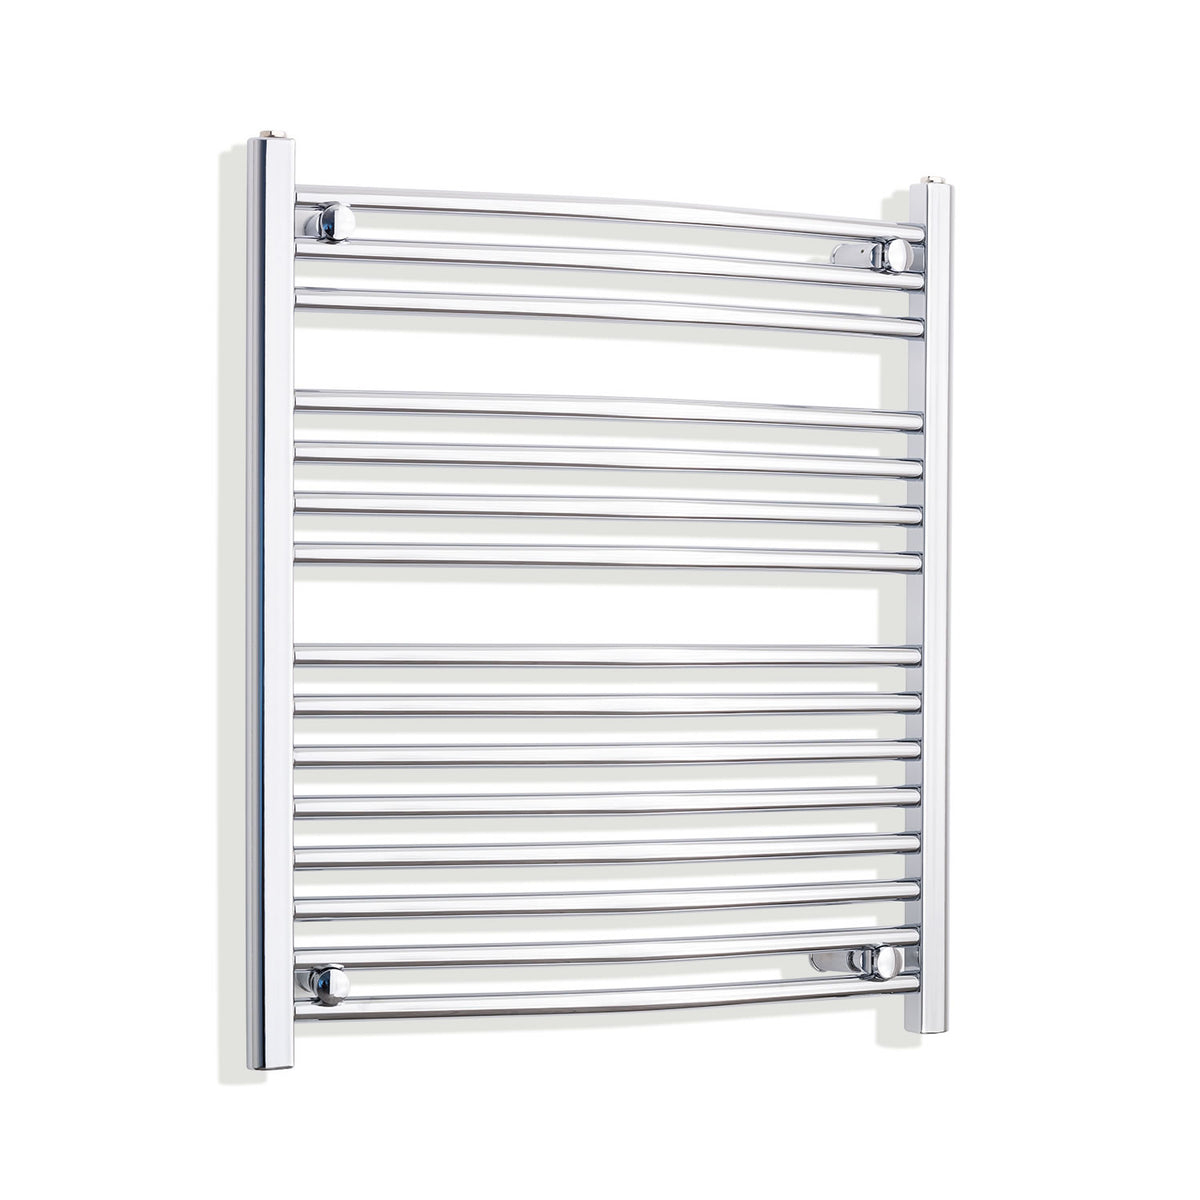 800 mm High x 700 mm Wide Heated Curved Towel Rail Radiator Chrome With Straight Valve